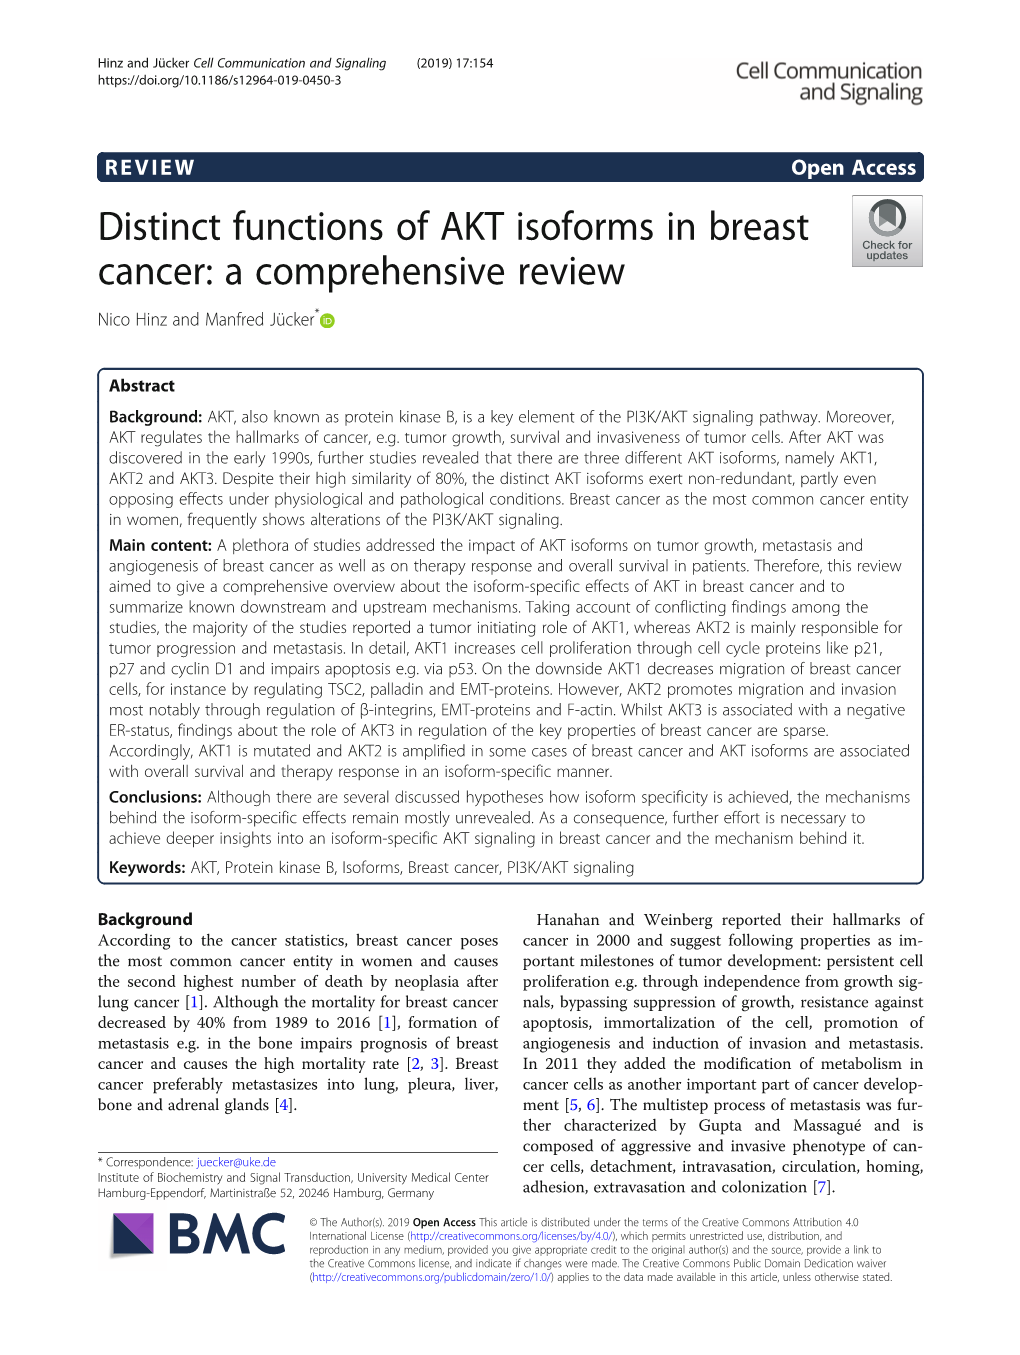 Distinct Functions of AKT Isoforms in Breast Cancer: a Comprehensive Review Nico Hinz and Manfred Jücker*